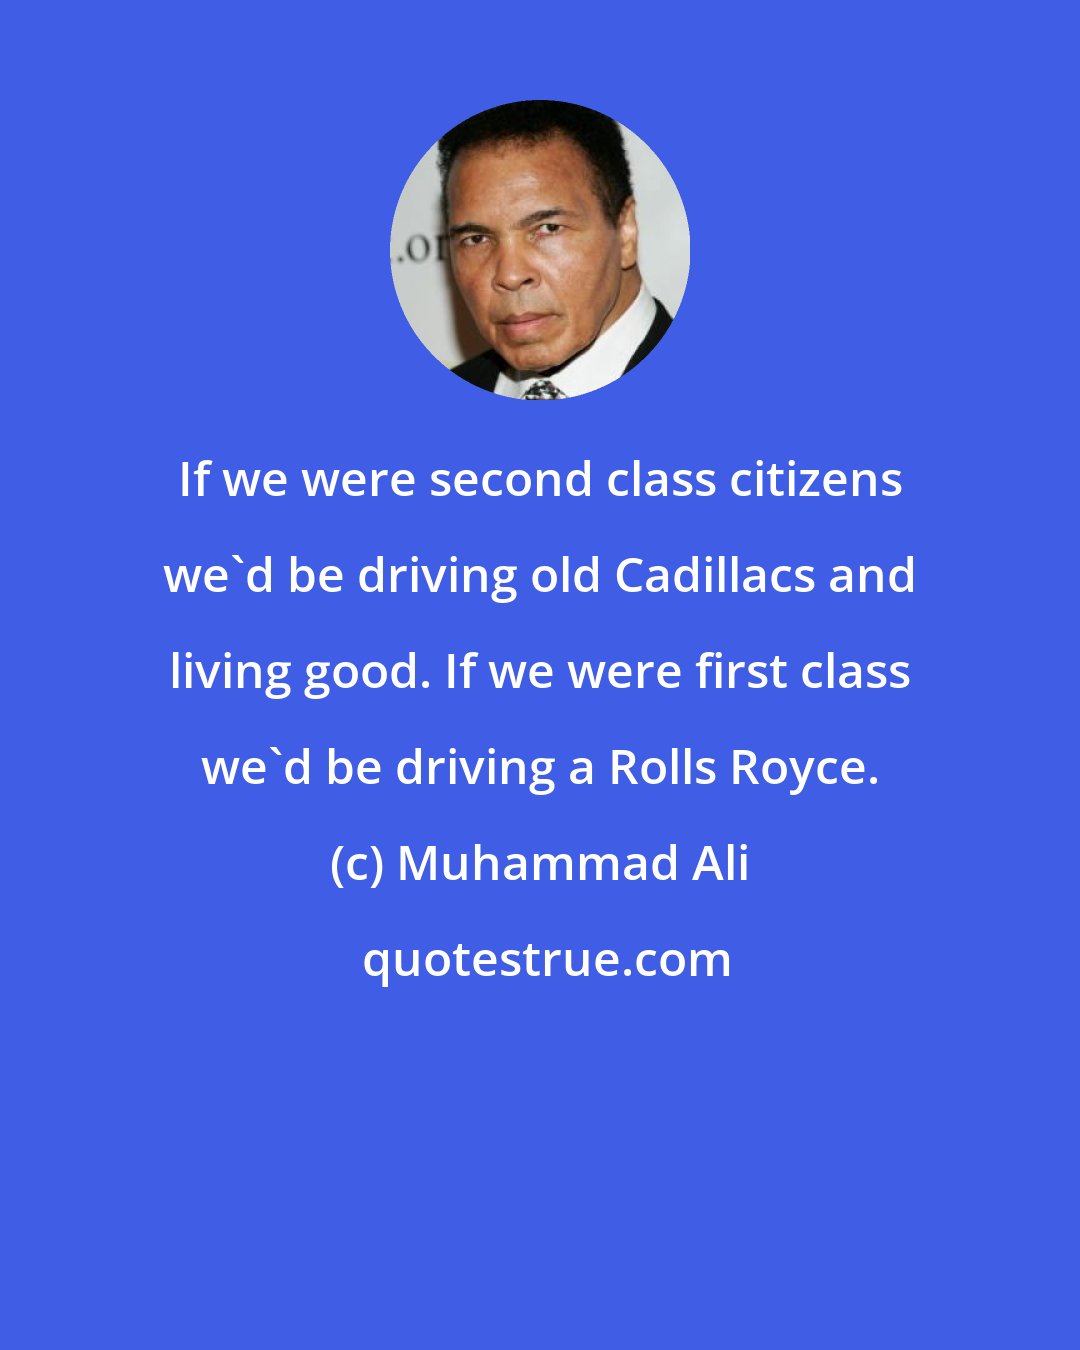 Muhammad Ali: If we were second class citizens we'd be driving old Cadillacs and living good. If we were first class we'd be driving a Rolls Royce.